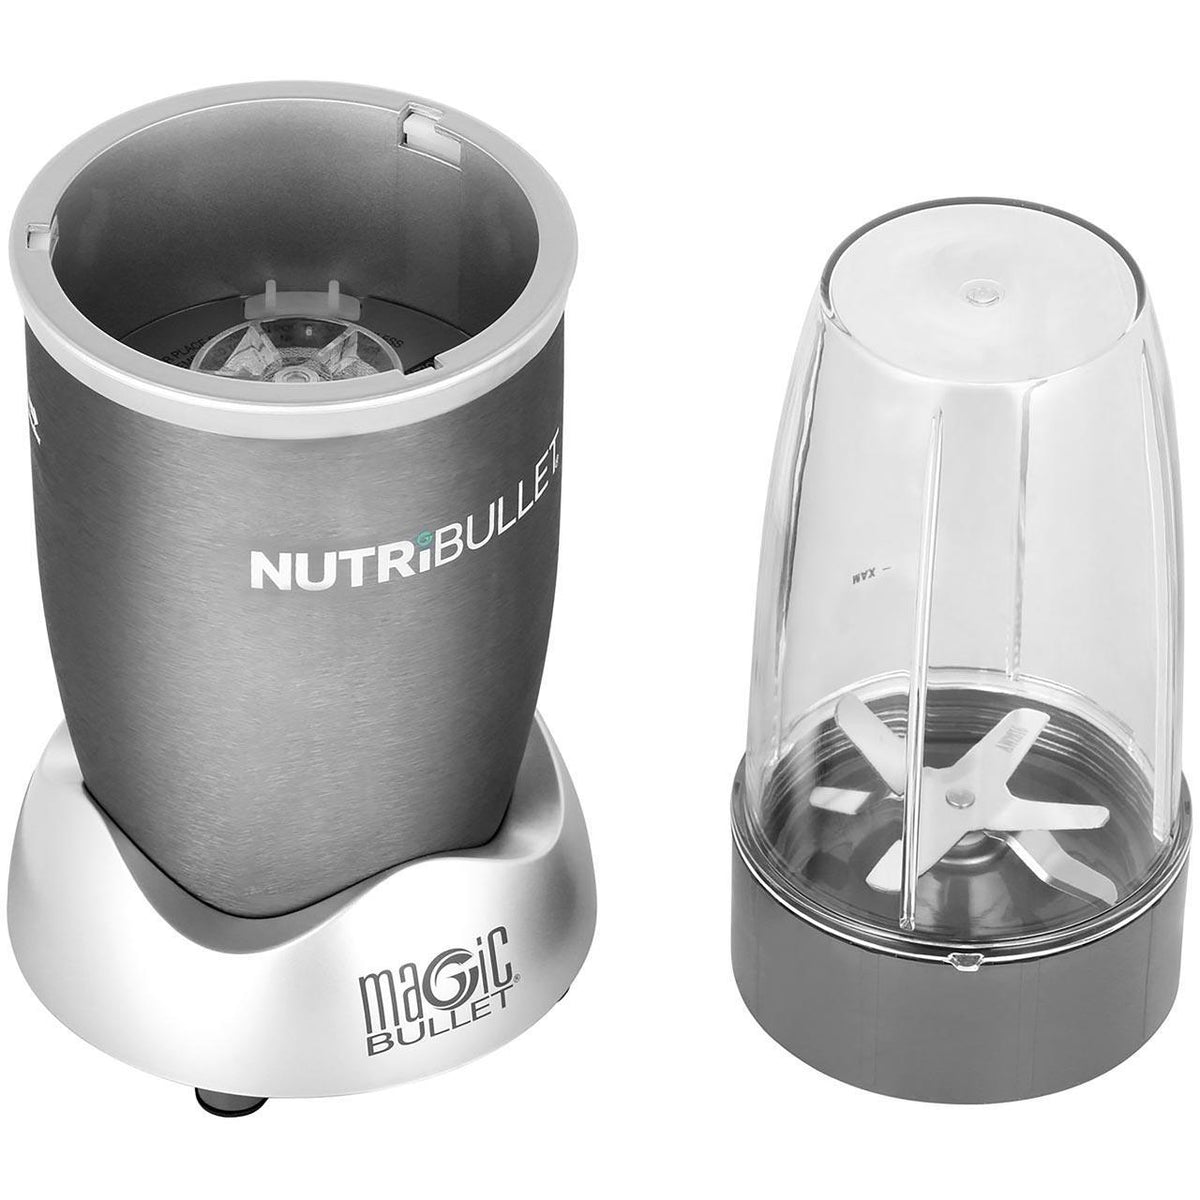 NutriBullet 600W Smoothie Maker - Graphite | NBL8 from DID Electrical - guaranteed Irish, guaranteed quality service. (6977387462844)